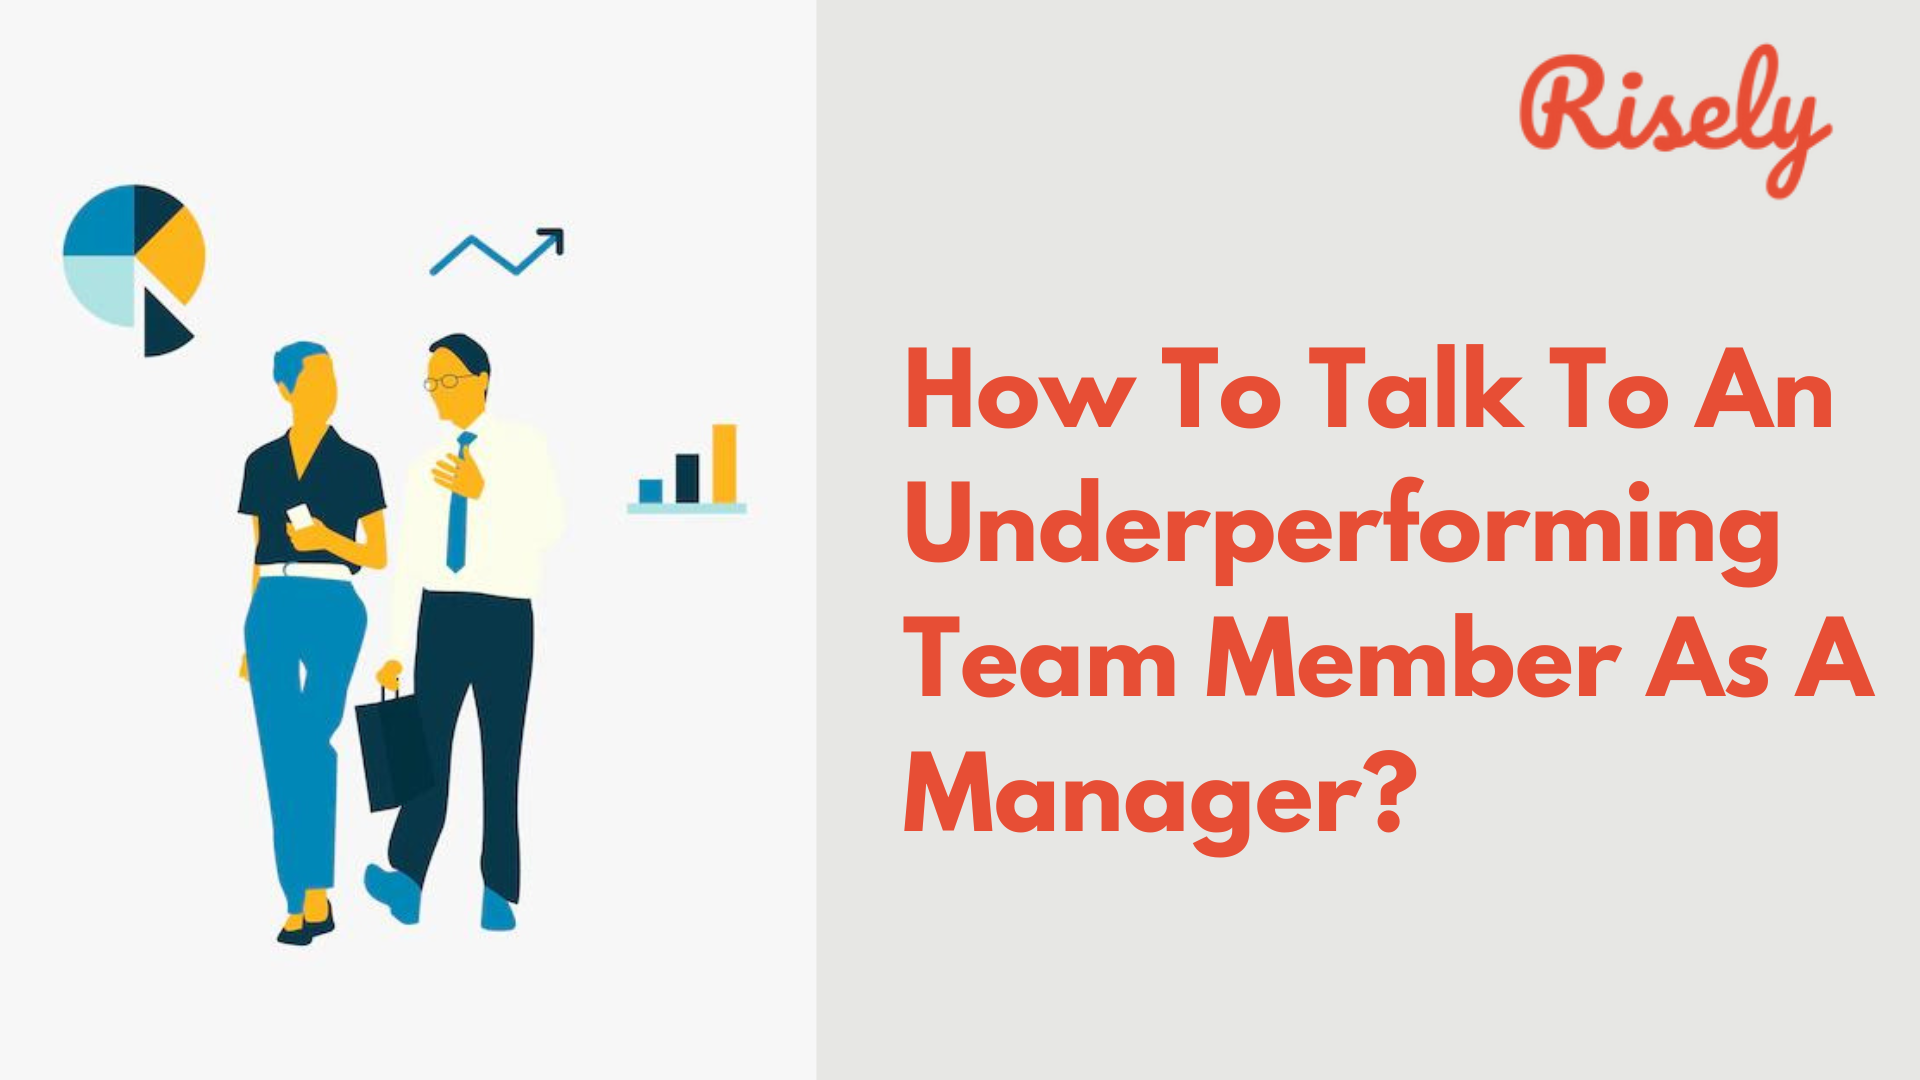 How To Talk To An Underperforming Team Member? 5 Simple Steps